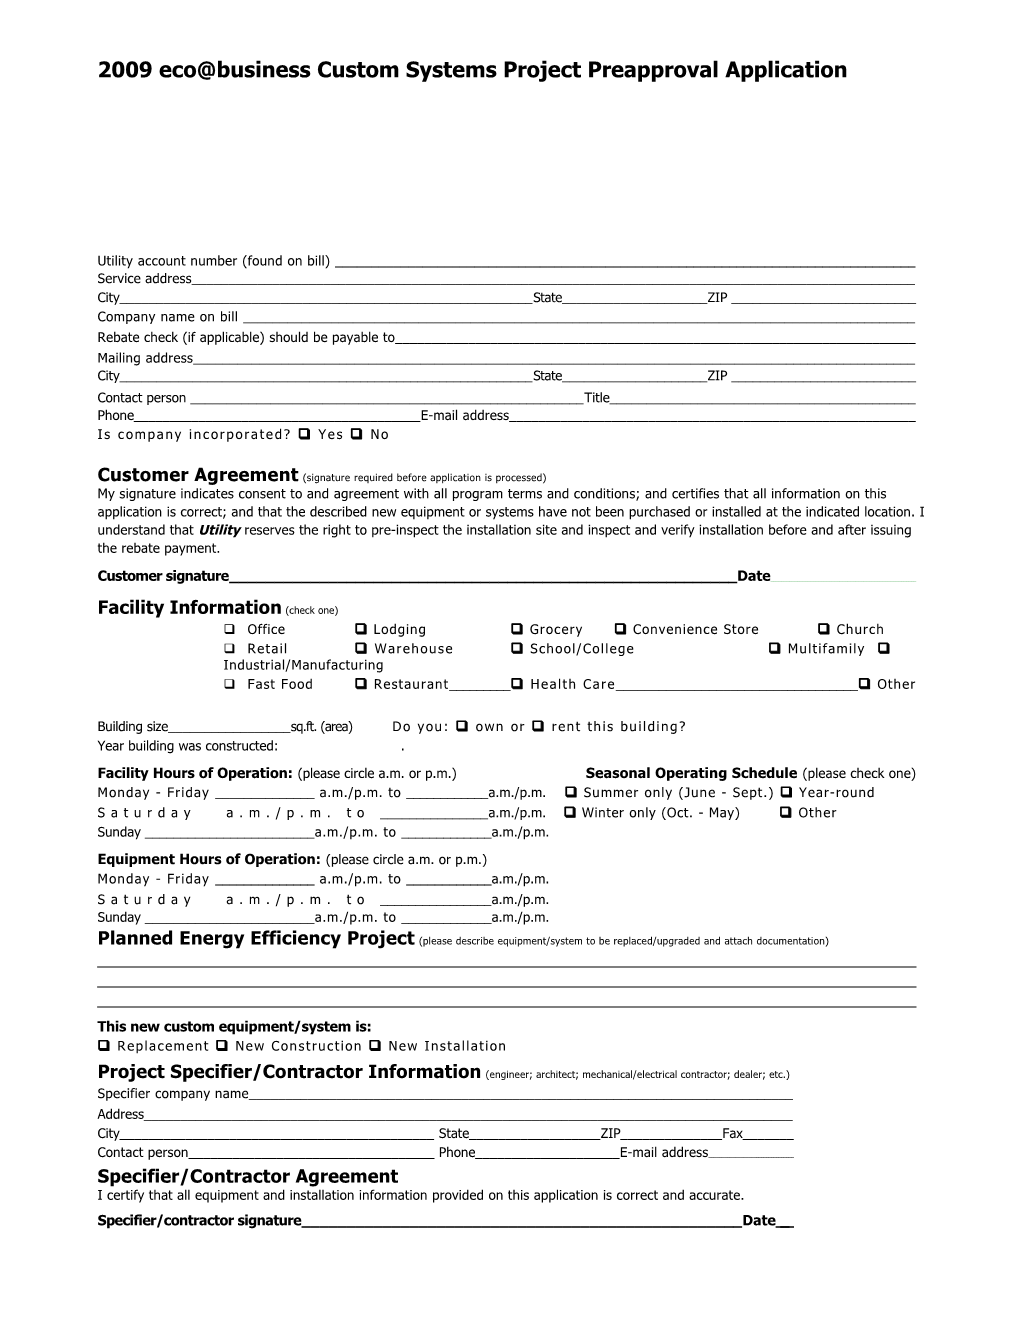 2009 Eco Business Custom Systems Project Preapproval Application